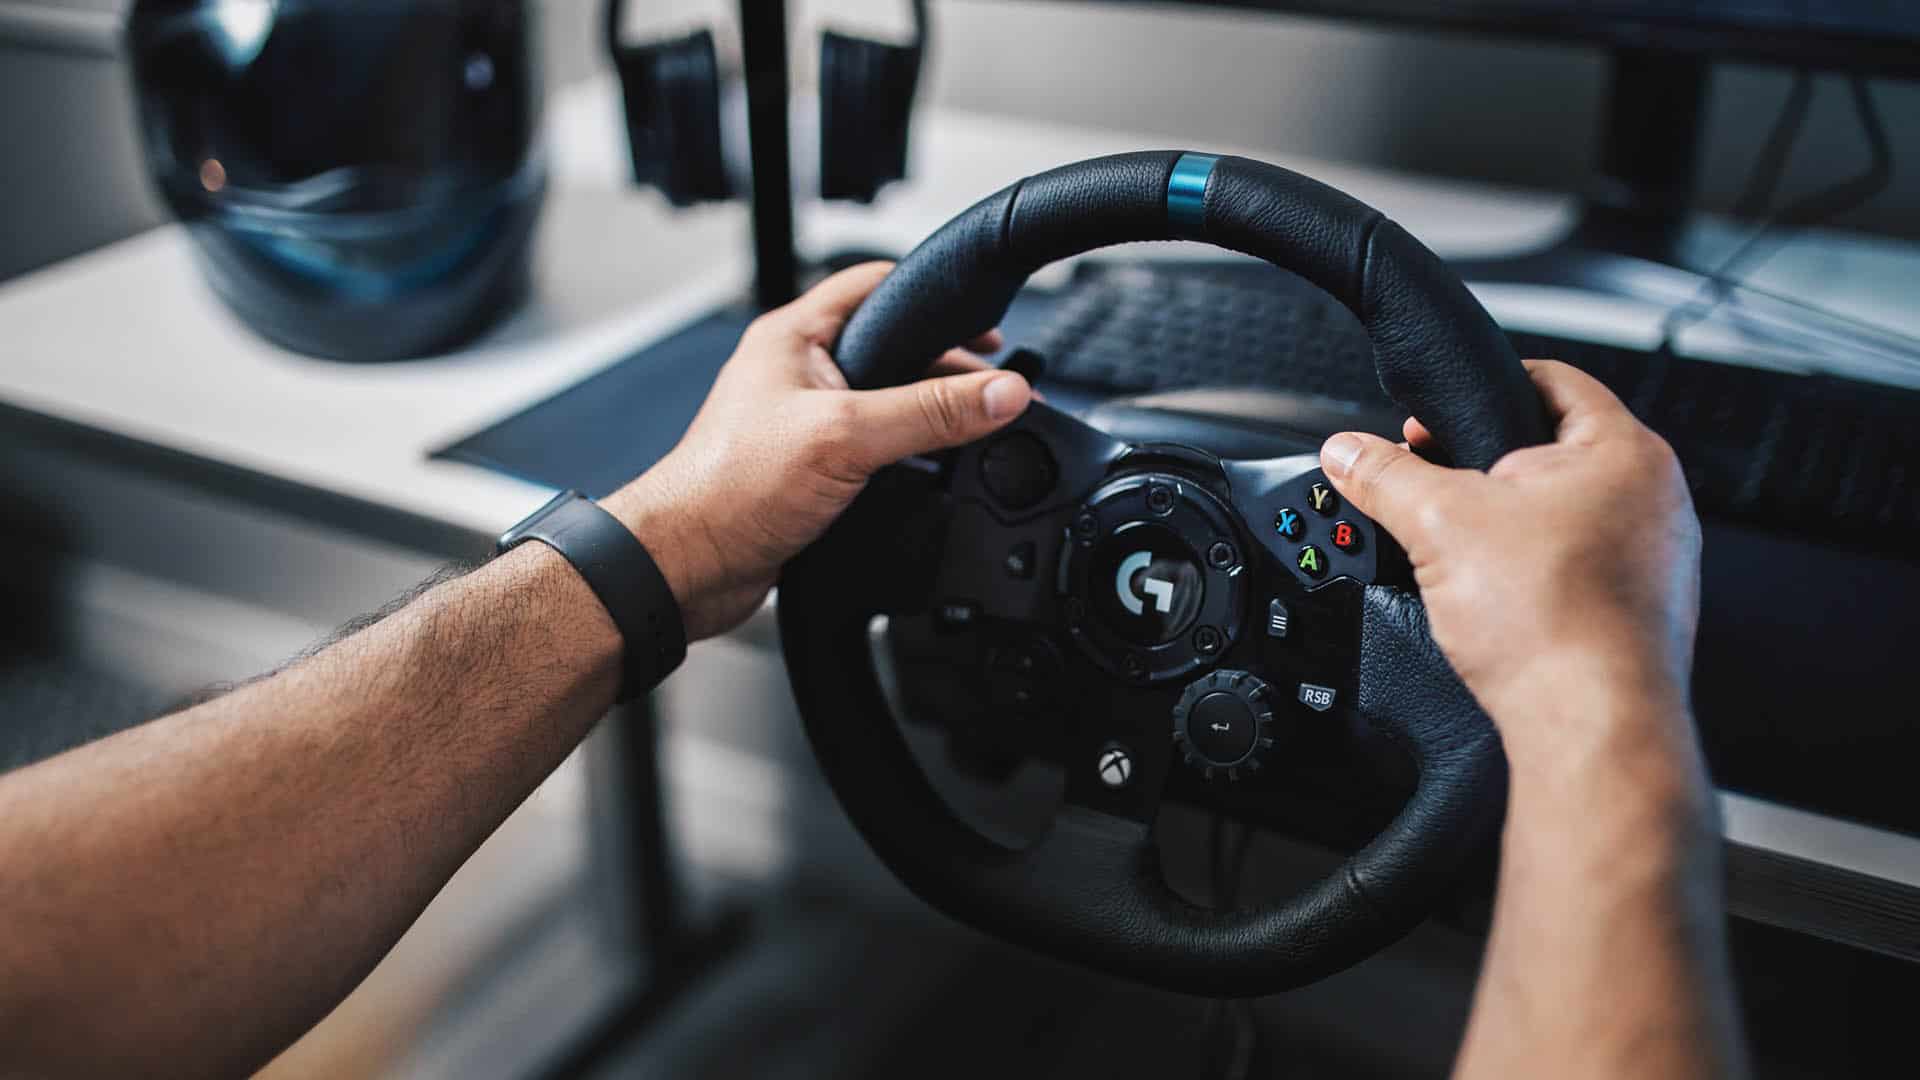 Need For Speed: HEAT .. Support for Logitech Steering Wheel